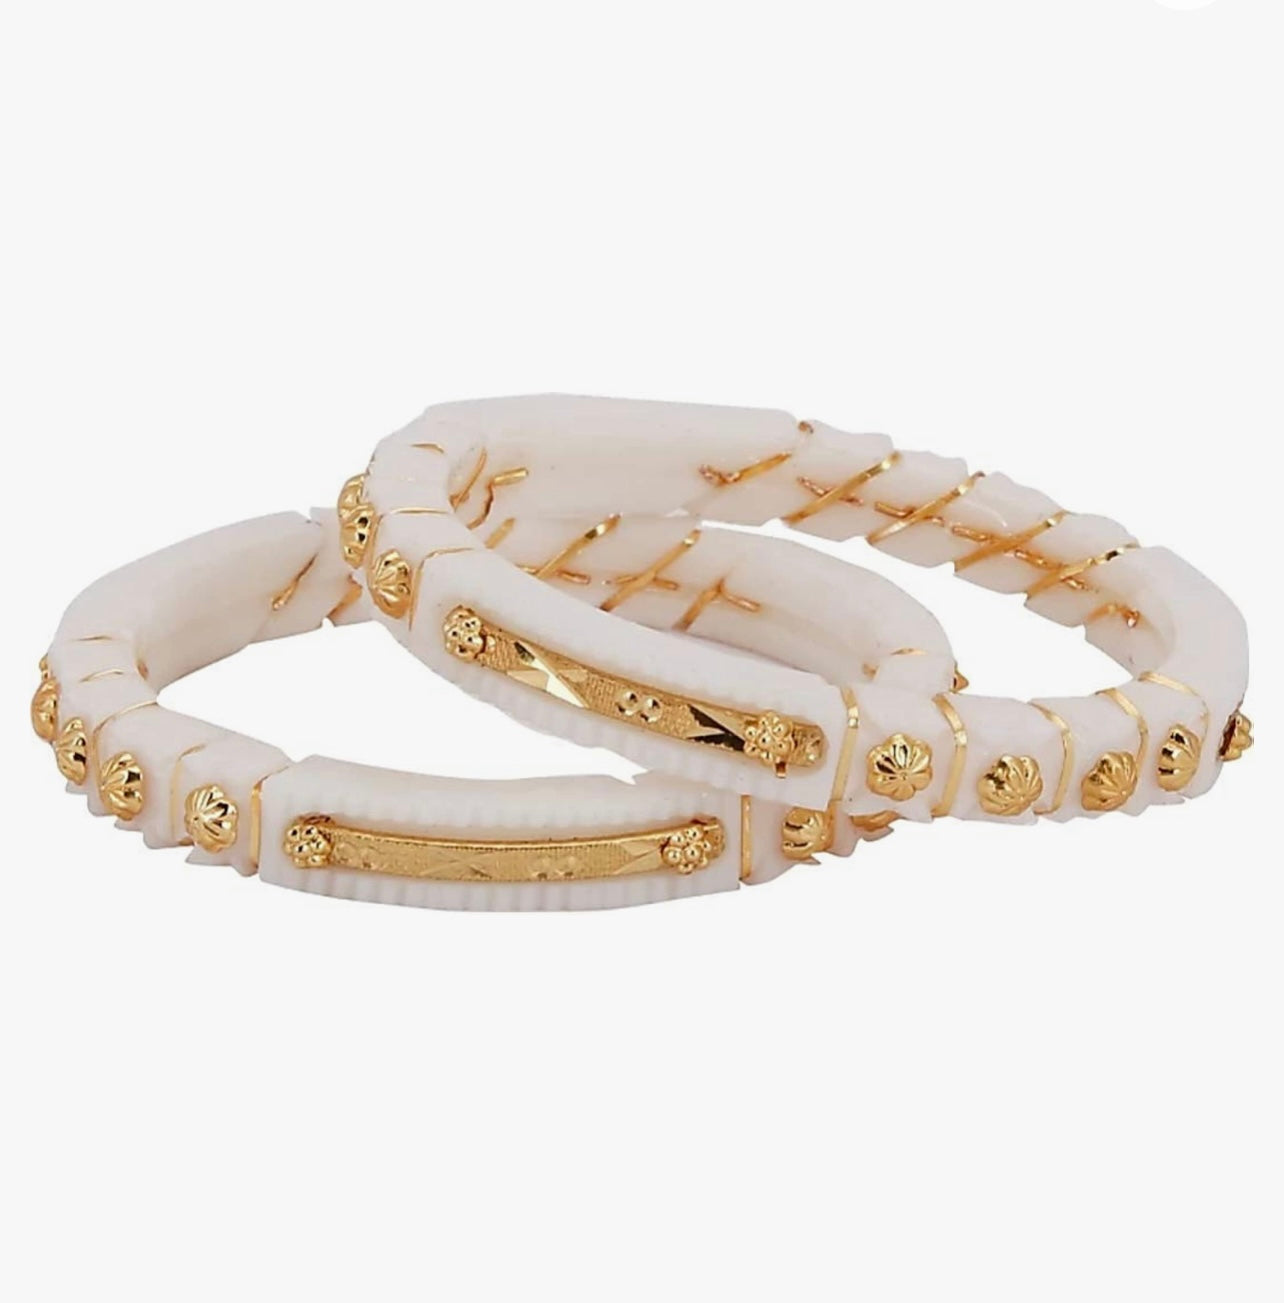 Buy Tanvi J Plastic Gold Plated Red and White Bracelet Pola Bangle Set for  Women (2-2) at Amazon.in